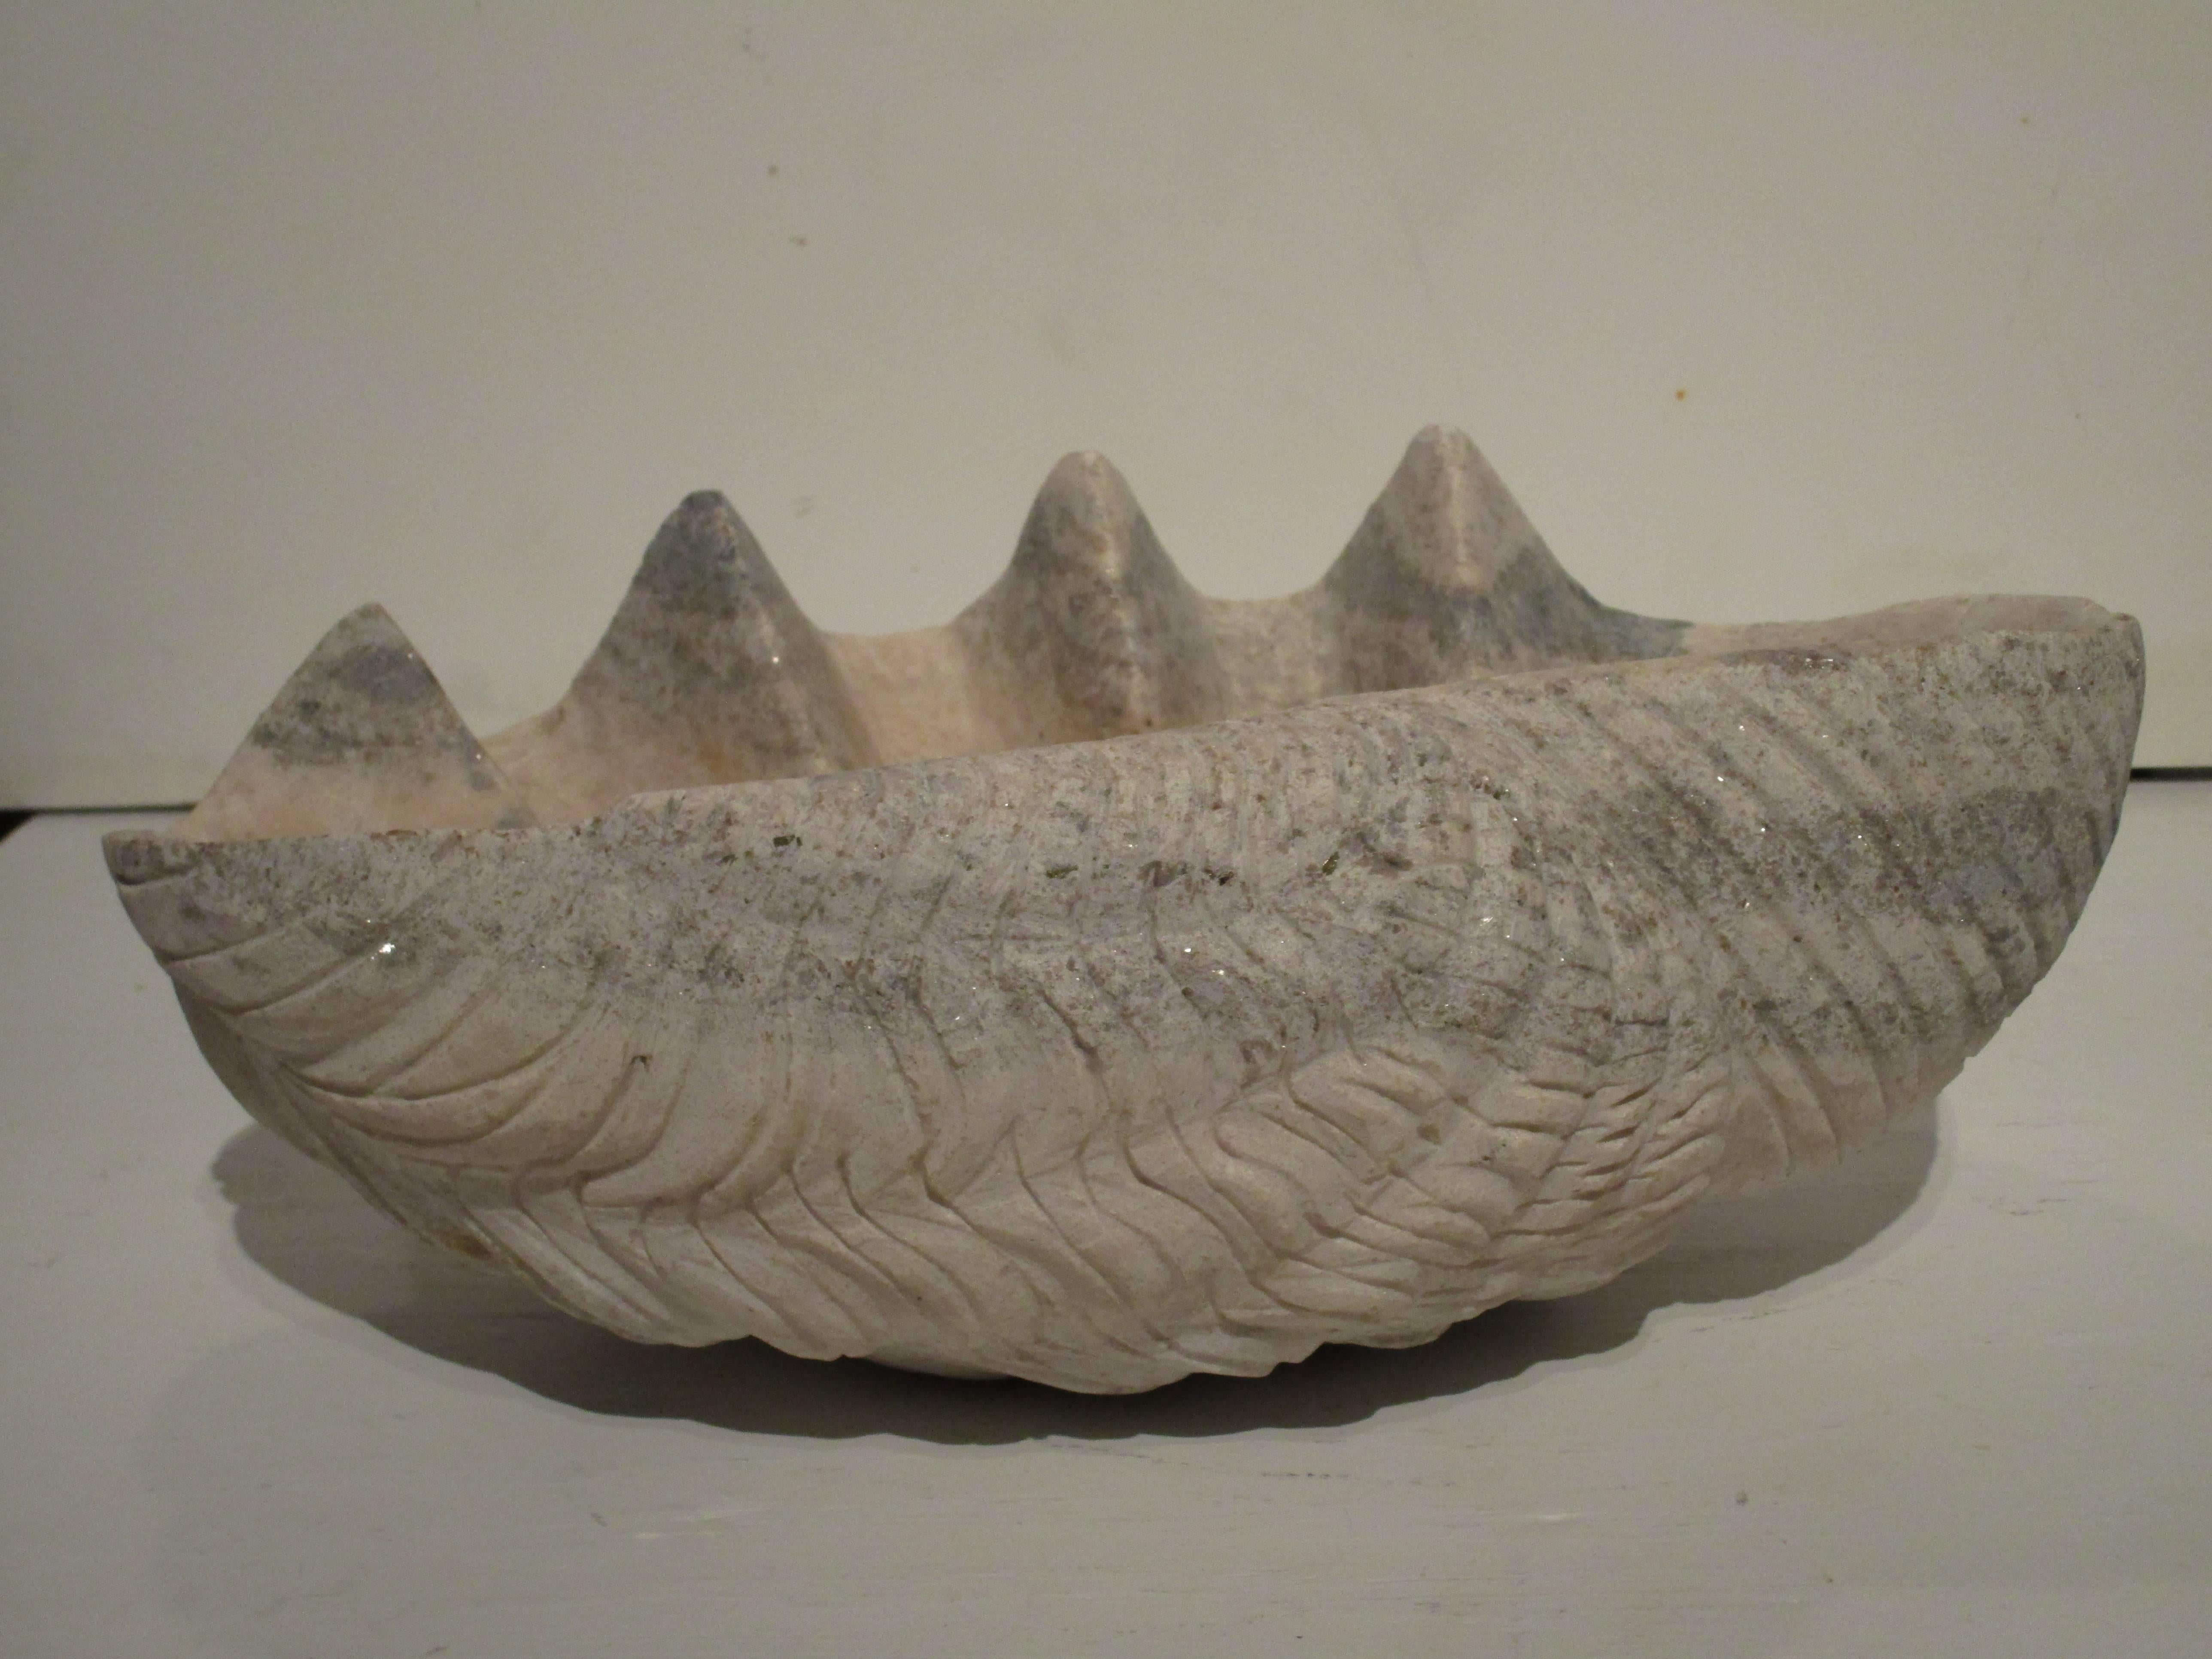 Large clam shell sculpture carved from stone.